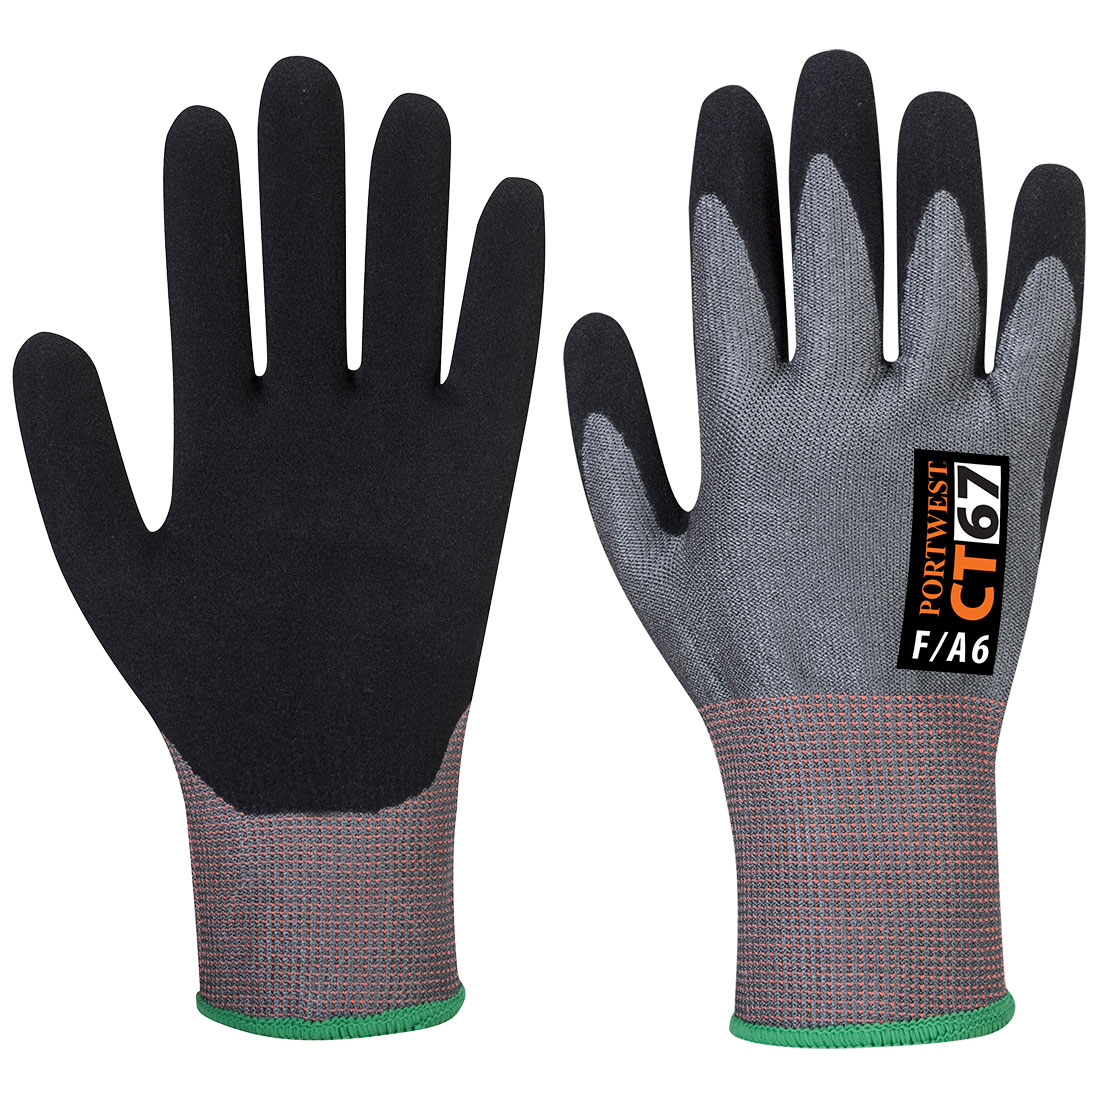 HAND PROTECTION, Cut Protection